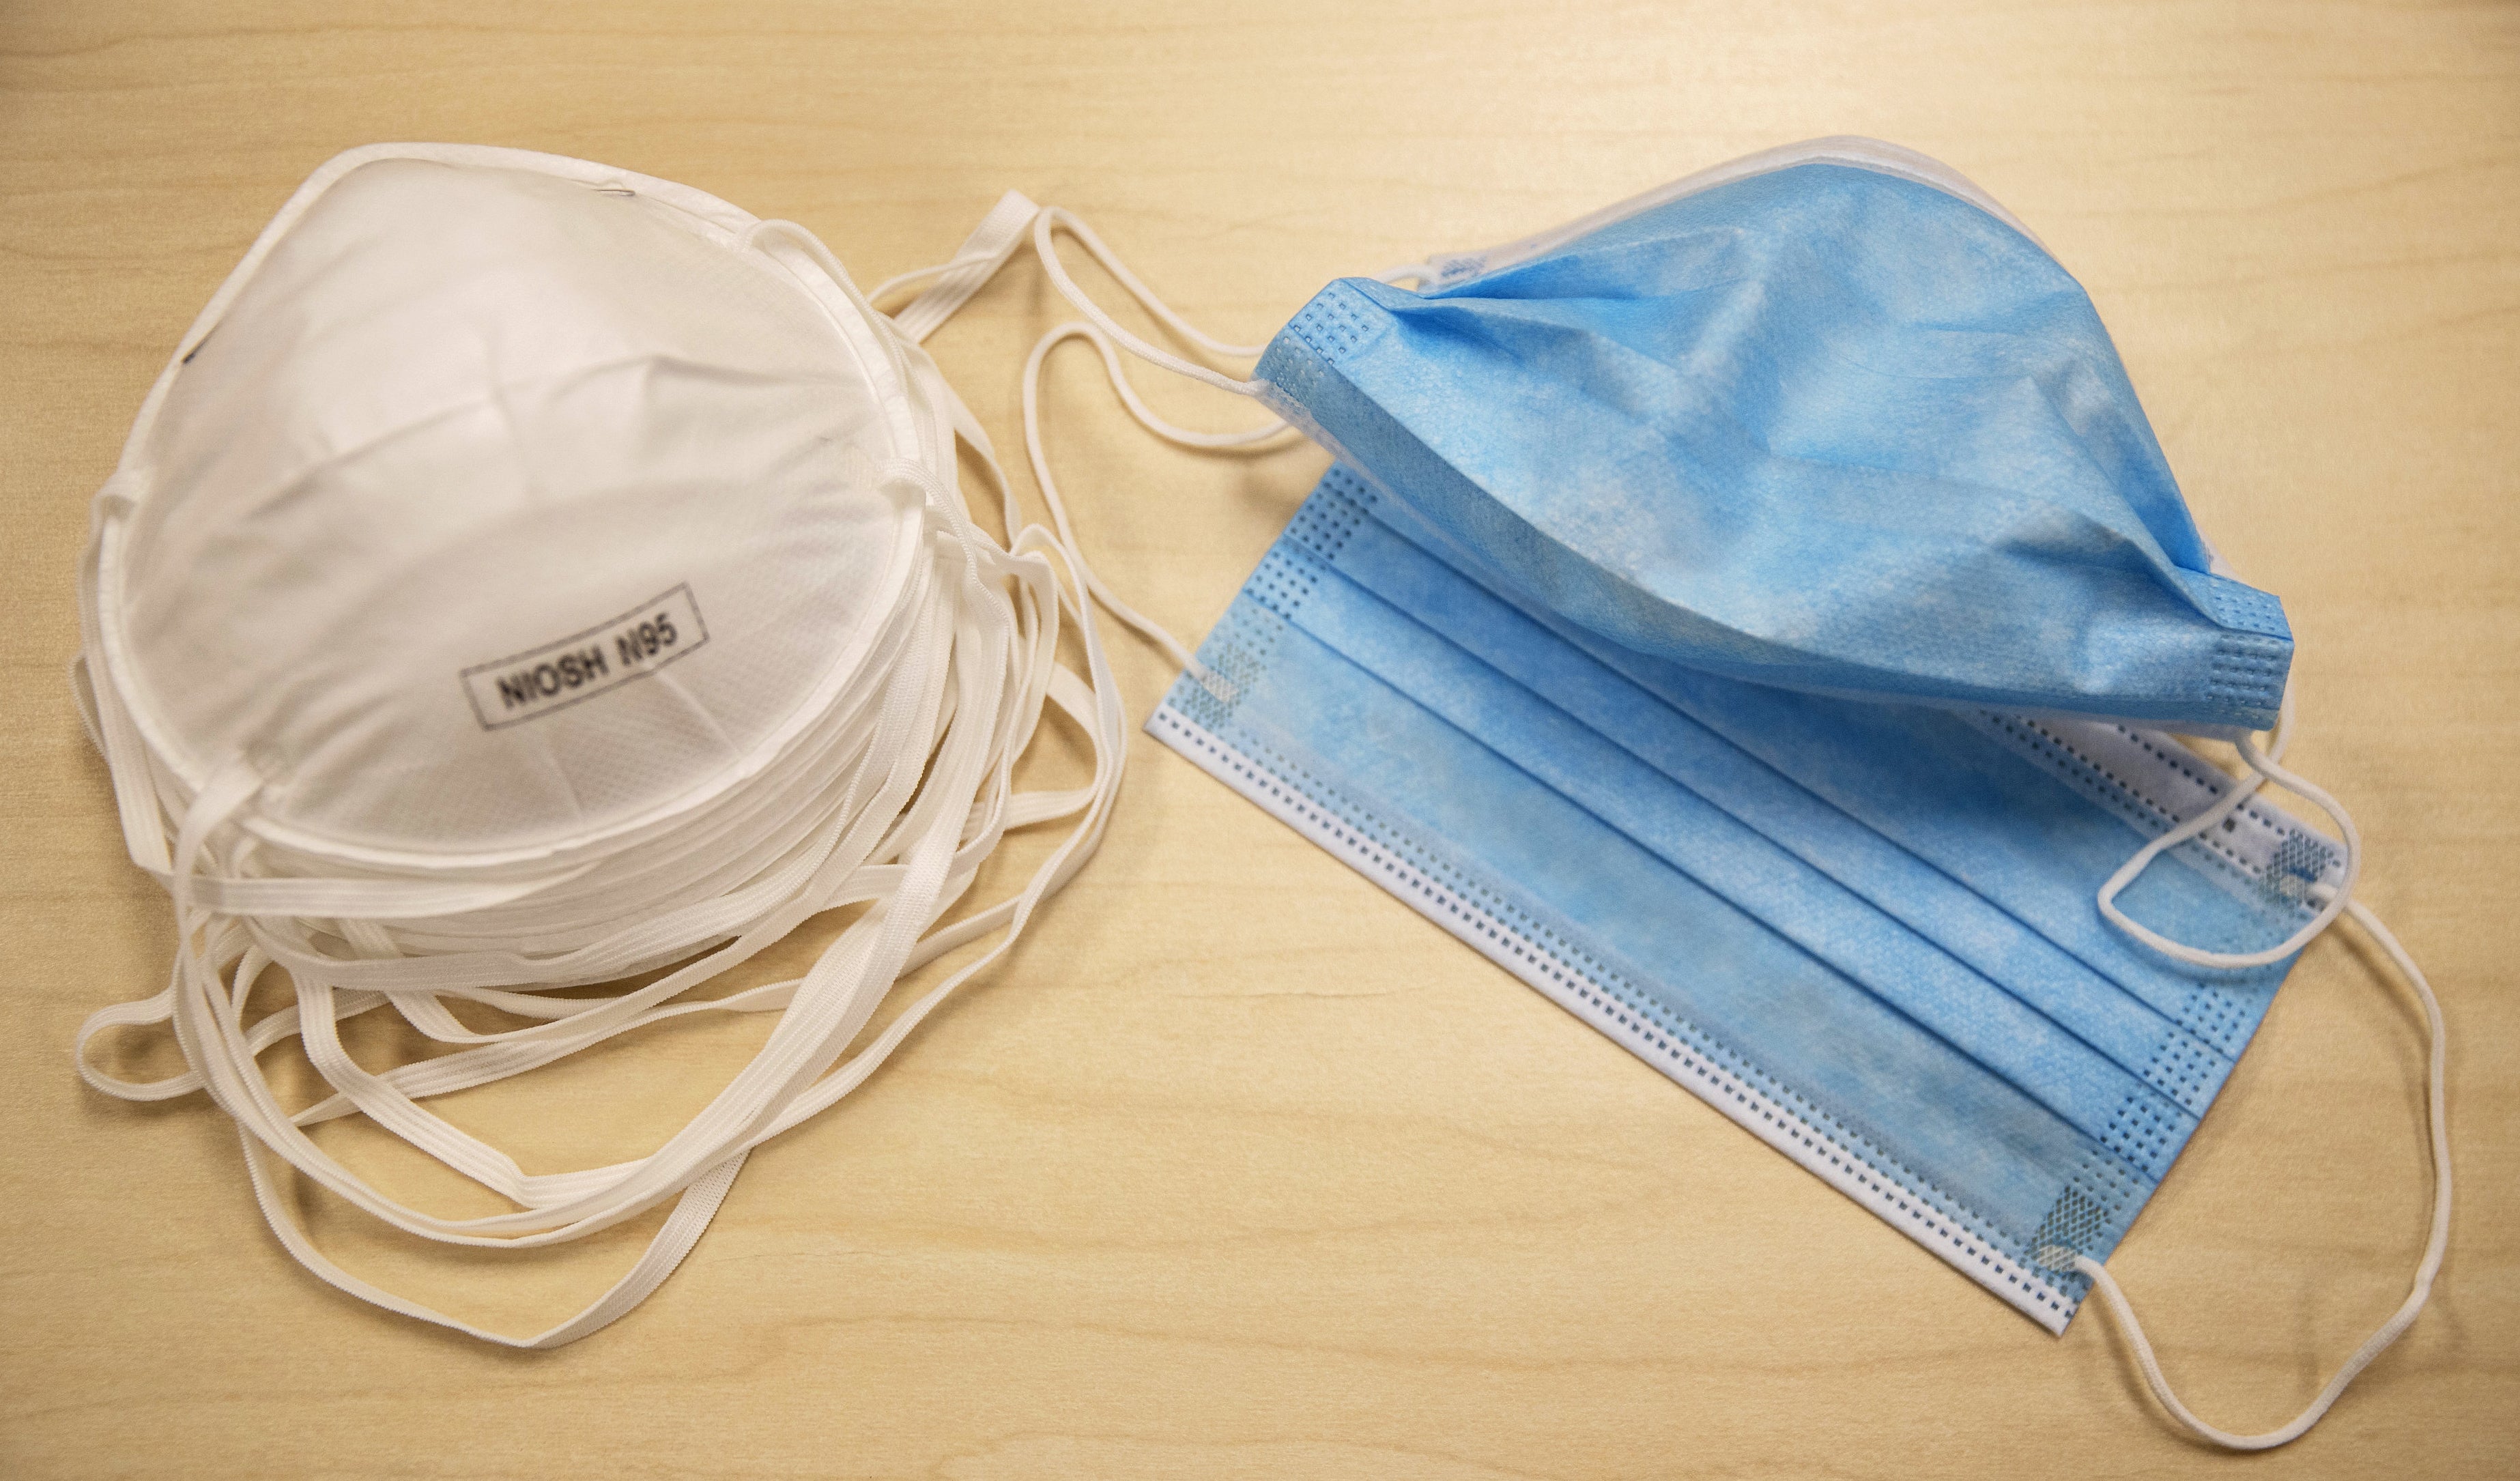 N95 particulate respirator masks left) block 95% of small airborne particulates in the air, however they are still in short supply and should be reserved for medical workers. Surgical face masks (right) are most effective at protecting others from the wearer's droplets.